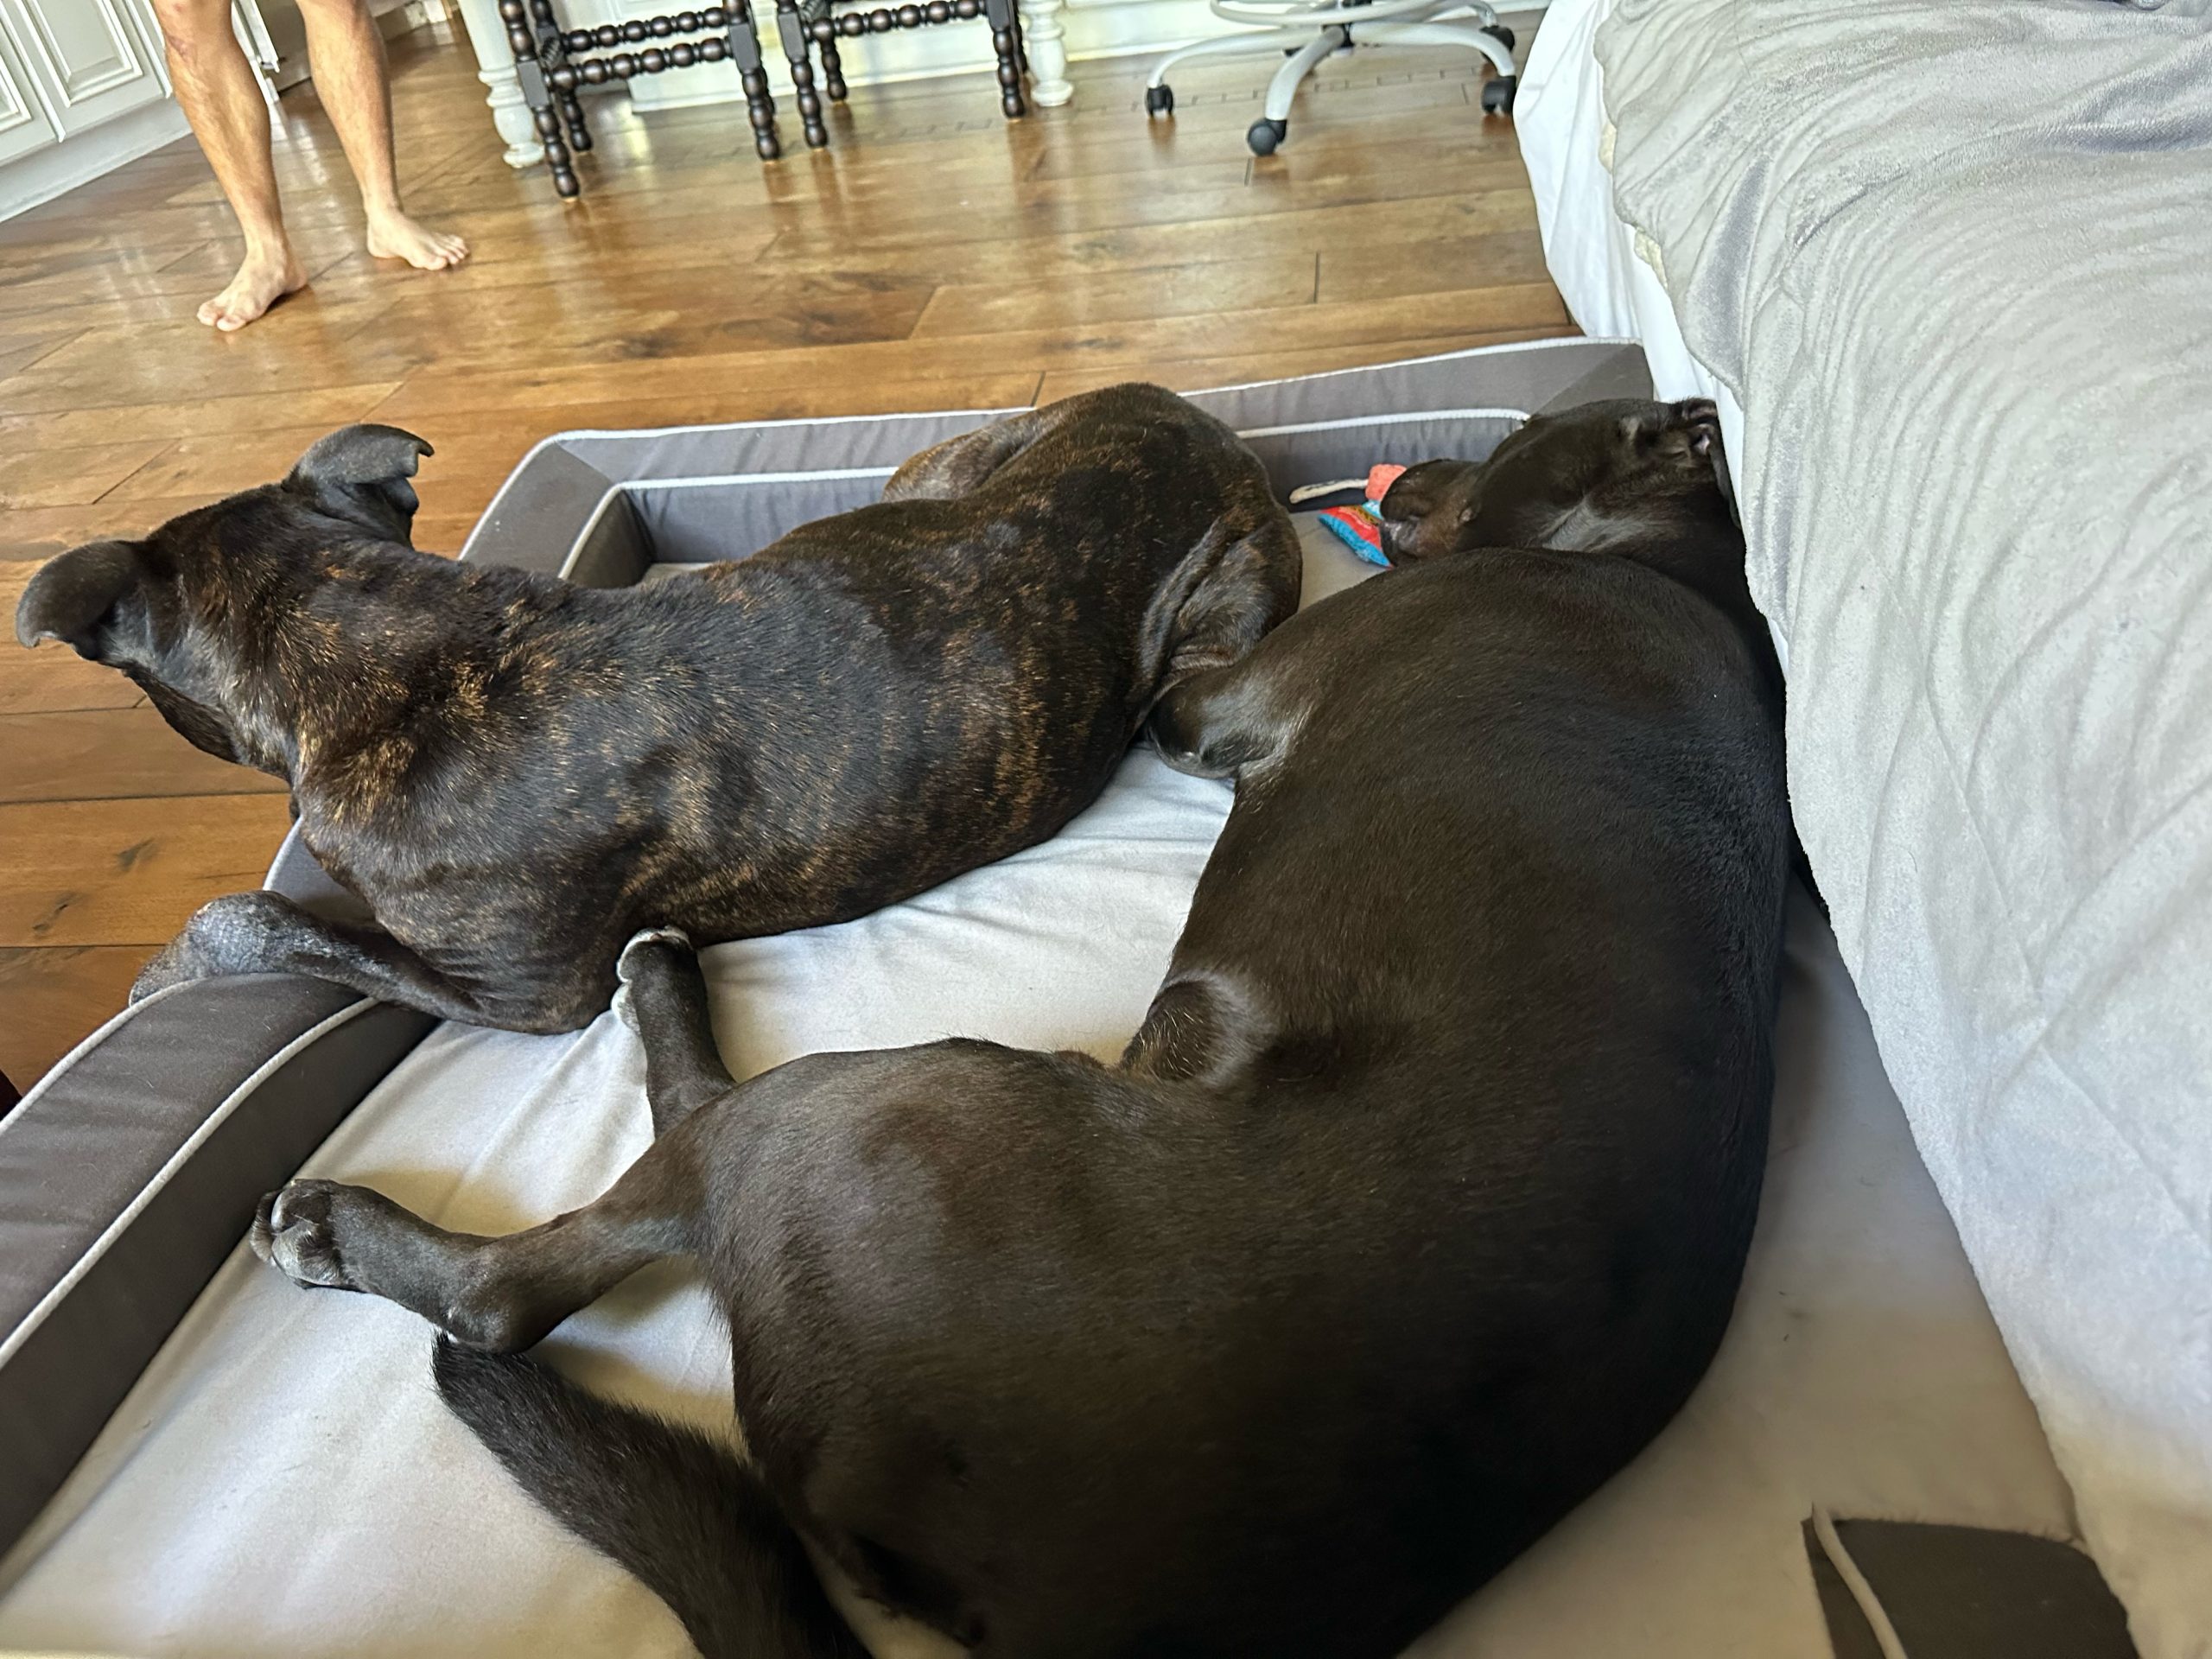 Baxter sleeping next to his foster brother, a black pitfall terrier